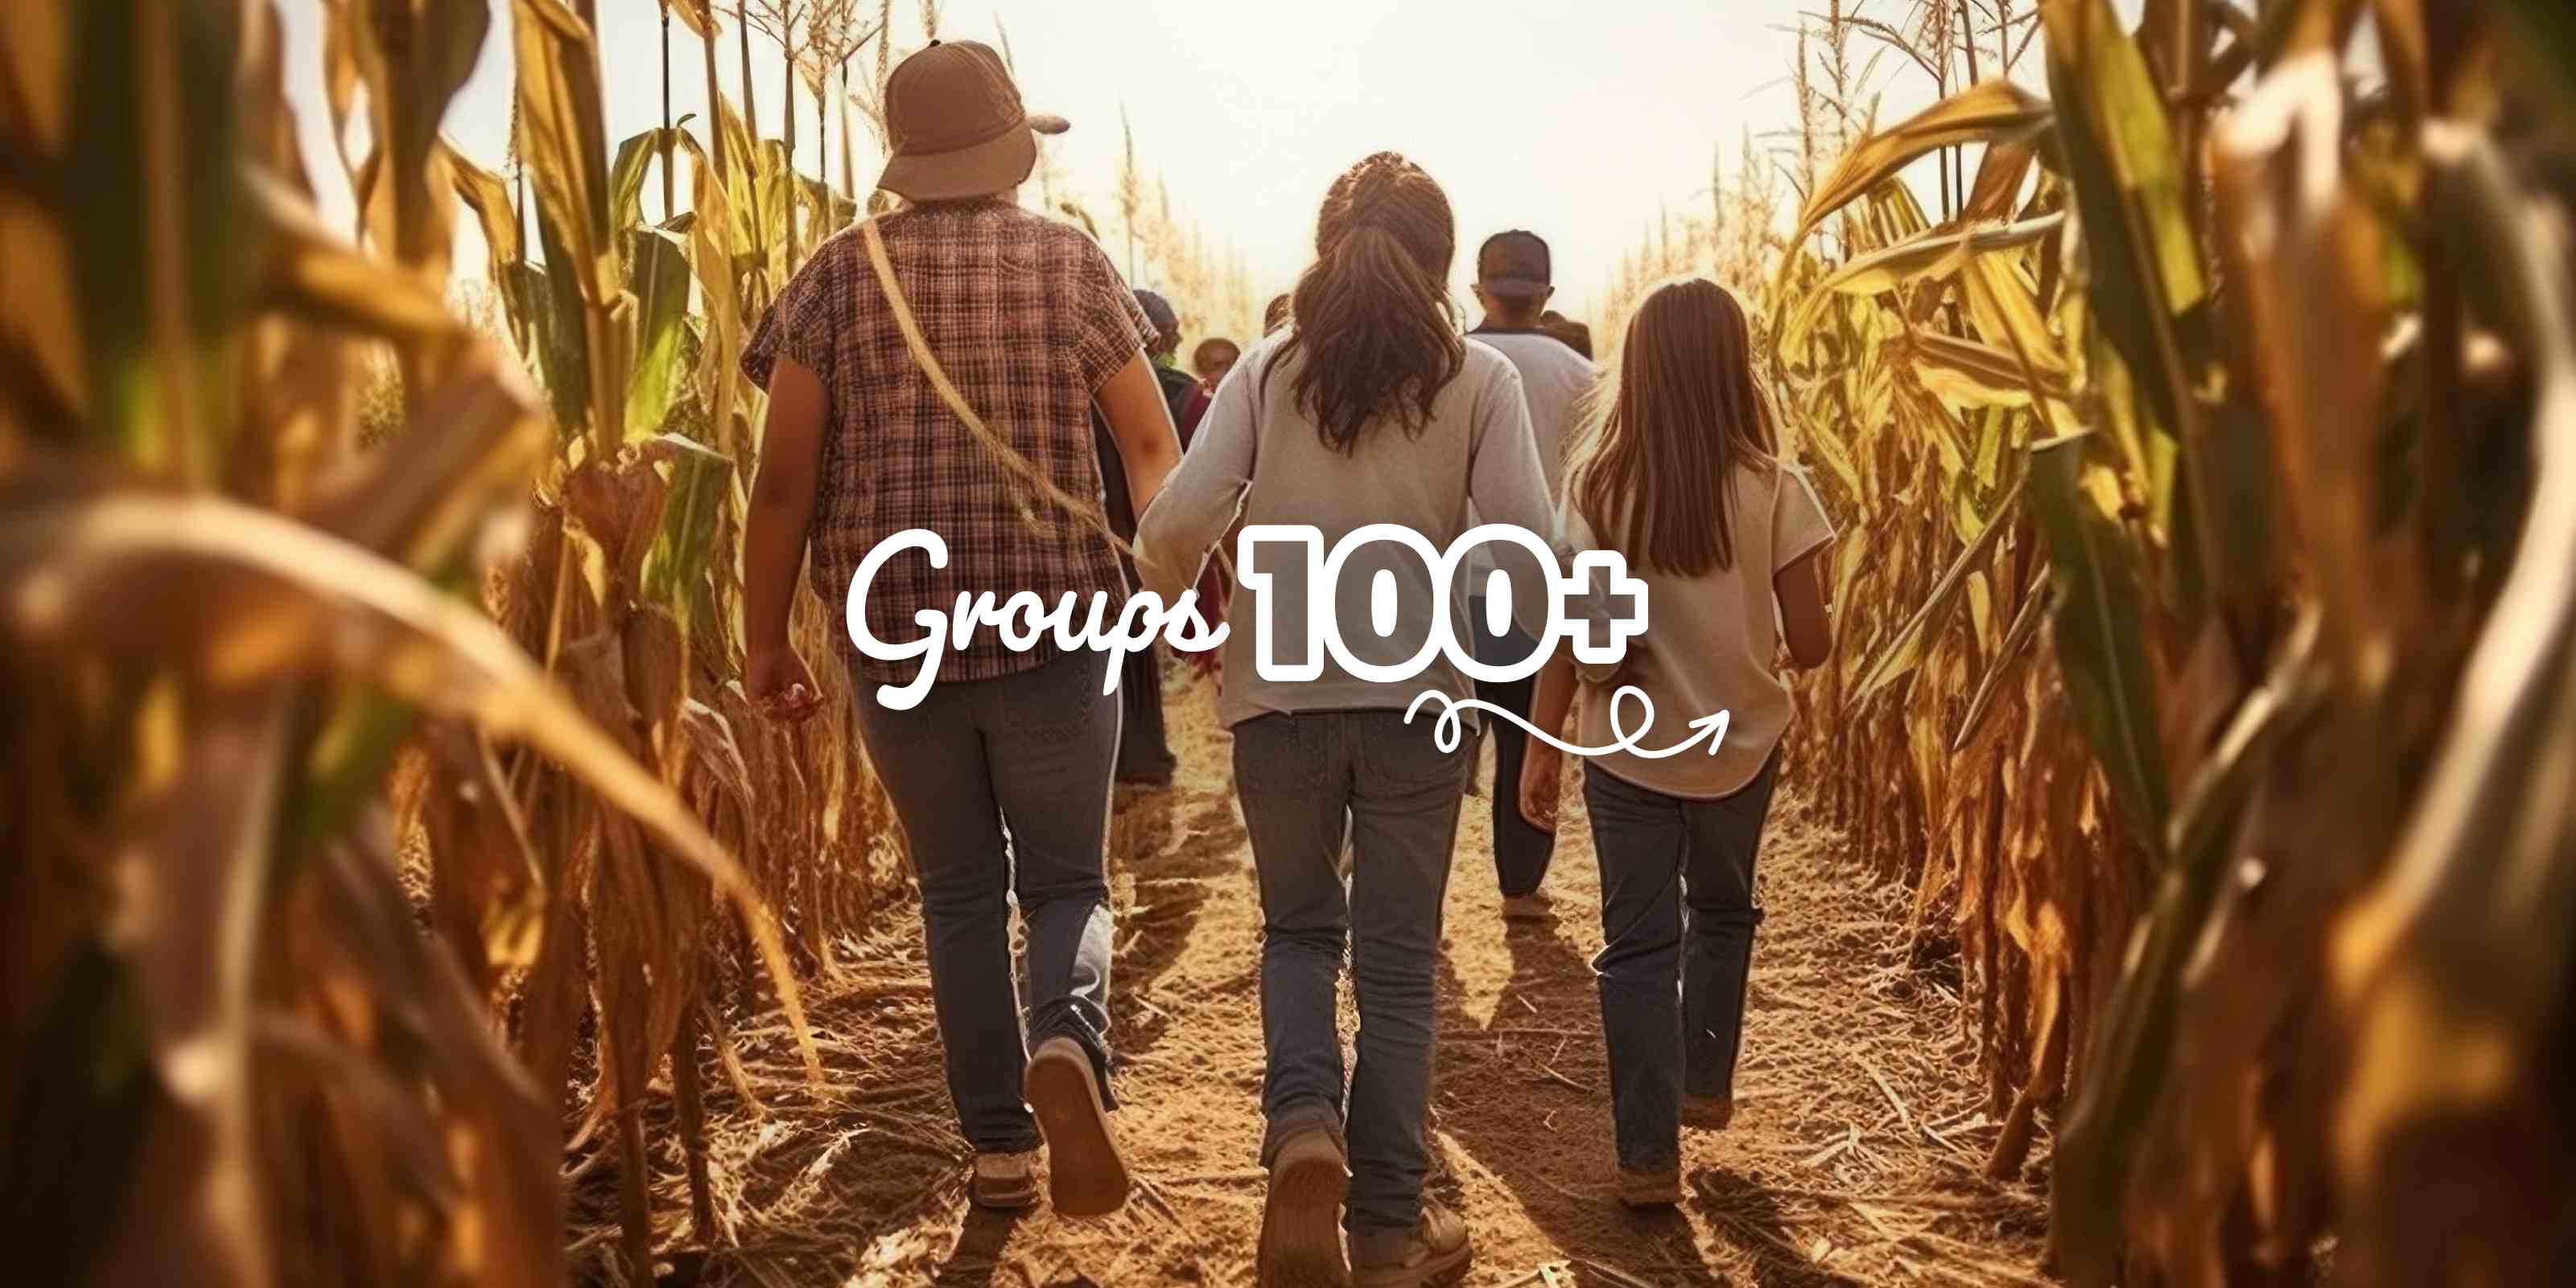 We love playing host to large groups for client appreciation nights, corporate family outings, etc. and offer $7 off admission for groups of 100+ in Lehi or $4 off in Spanish Fork. If you're interested in getting more info about booking a group of 100 or more or solidifying a reservation, fill out the inquiry form below. Upon receiving your booking request, you will receive a confirmation with more detailed information.